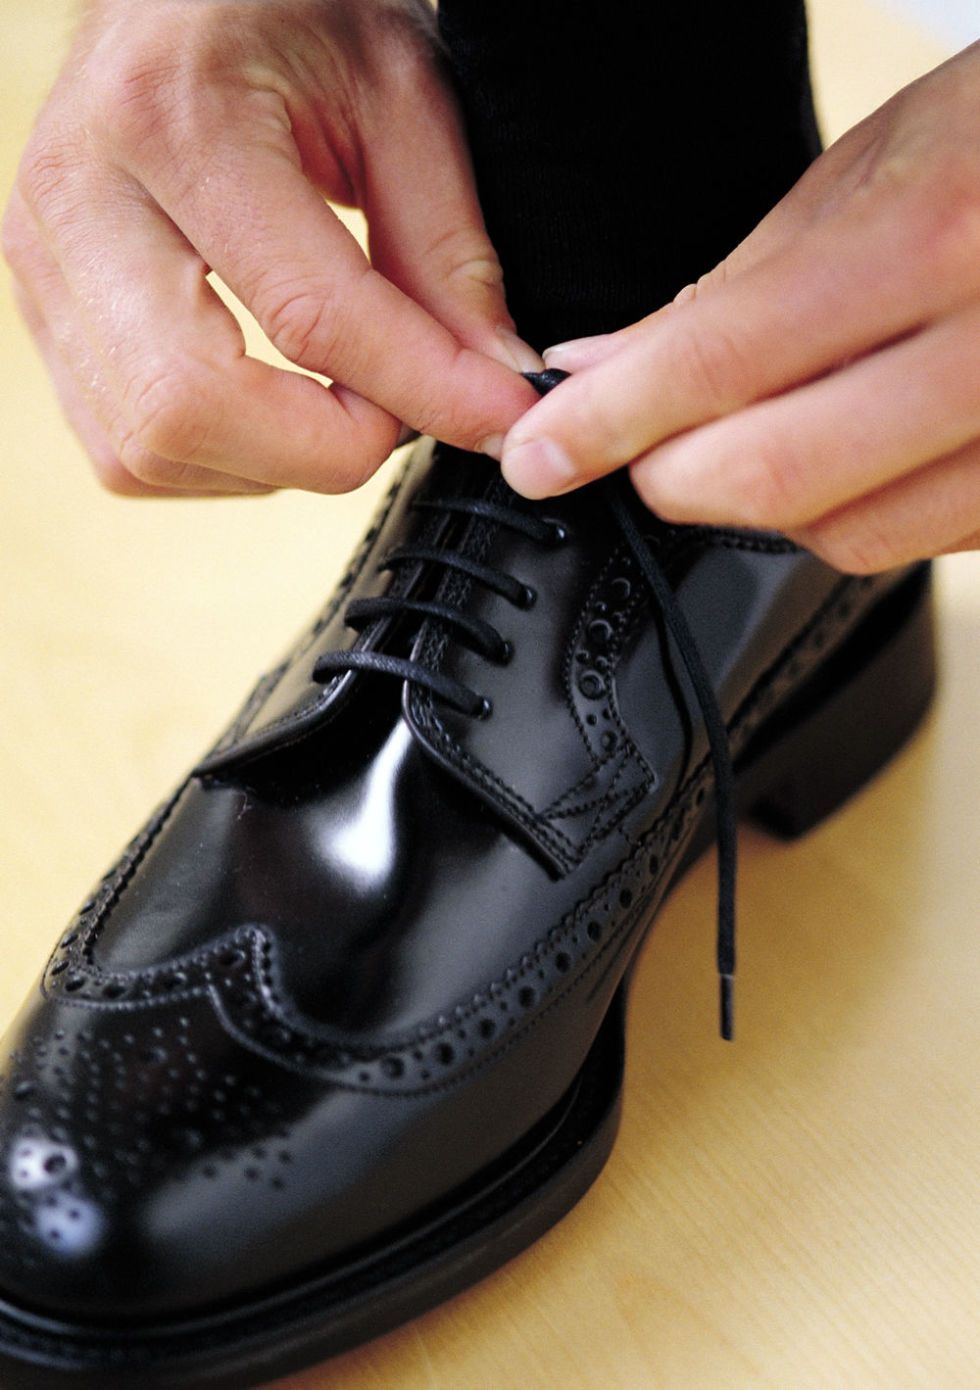 Here's How to Shine Your Shoes Like a Pro